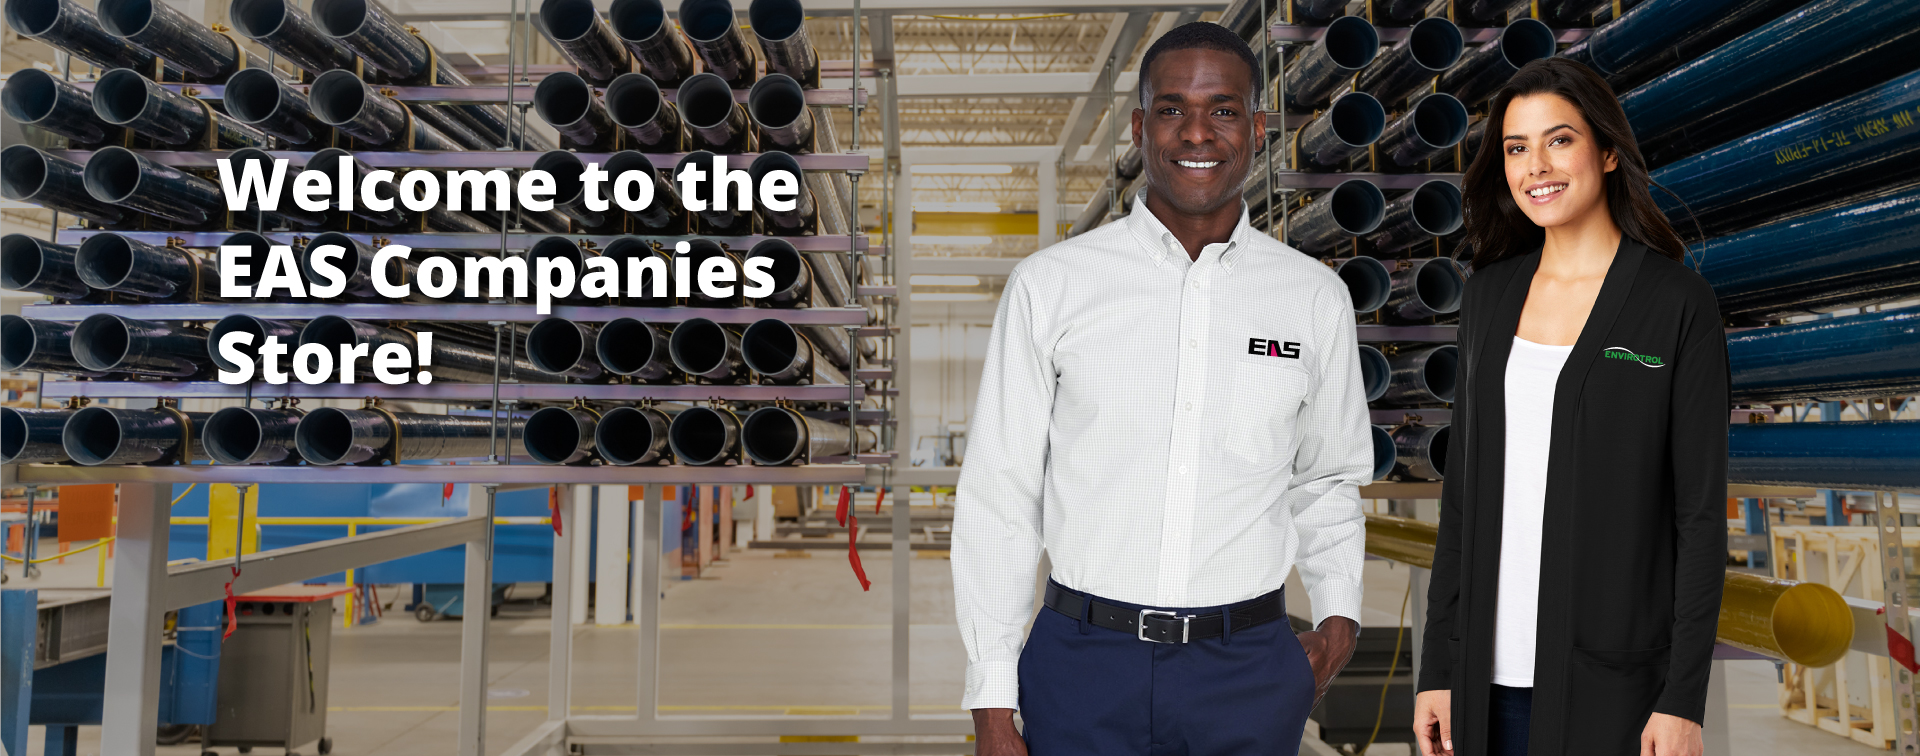 Welcome to the EAS Companies store!